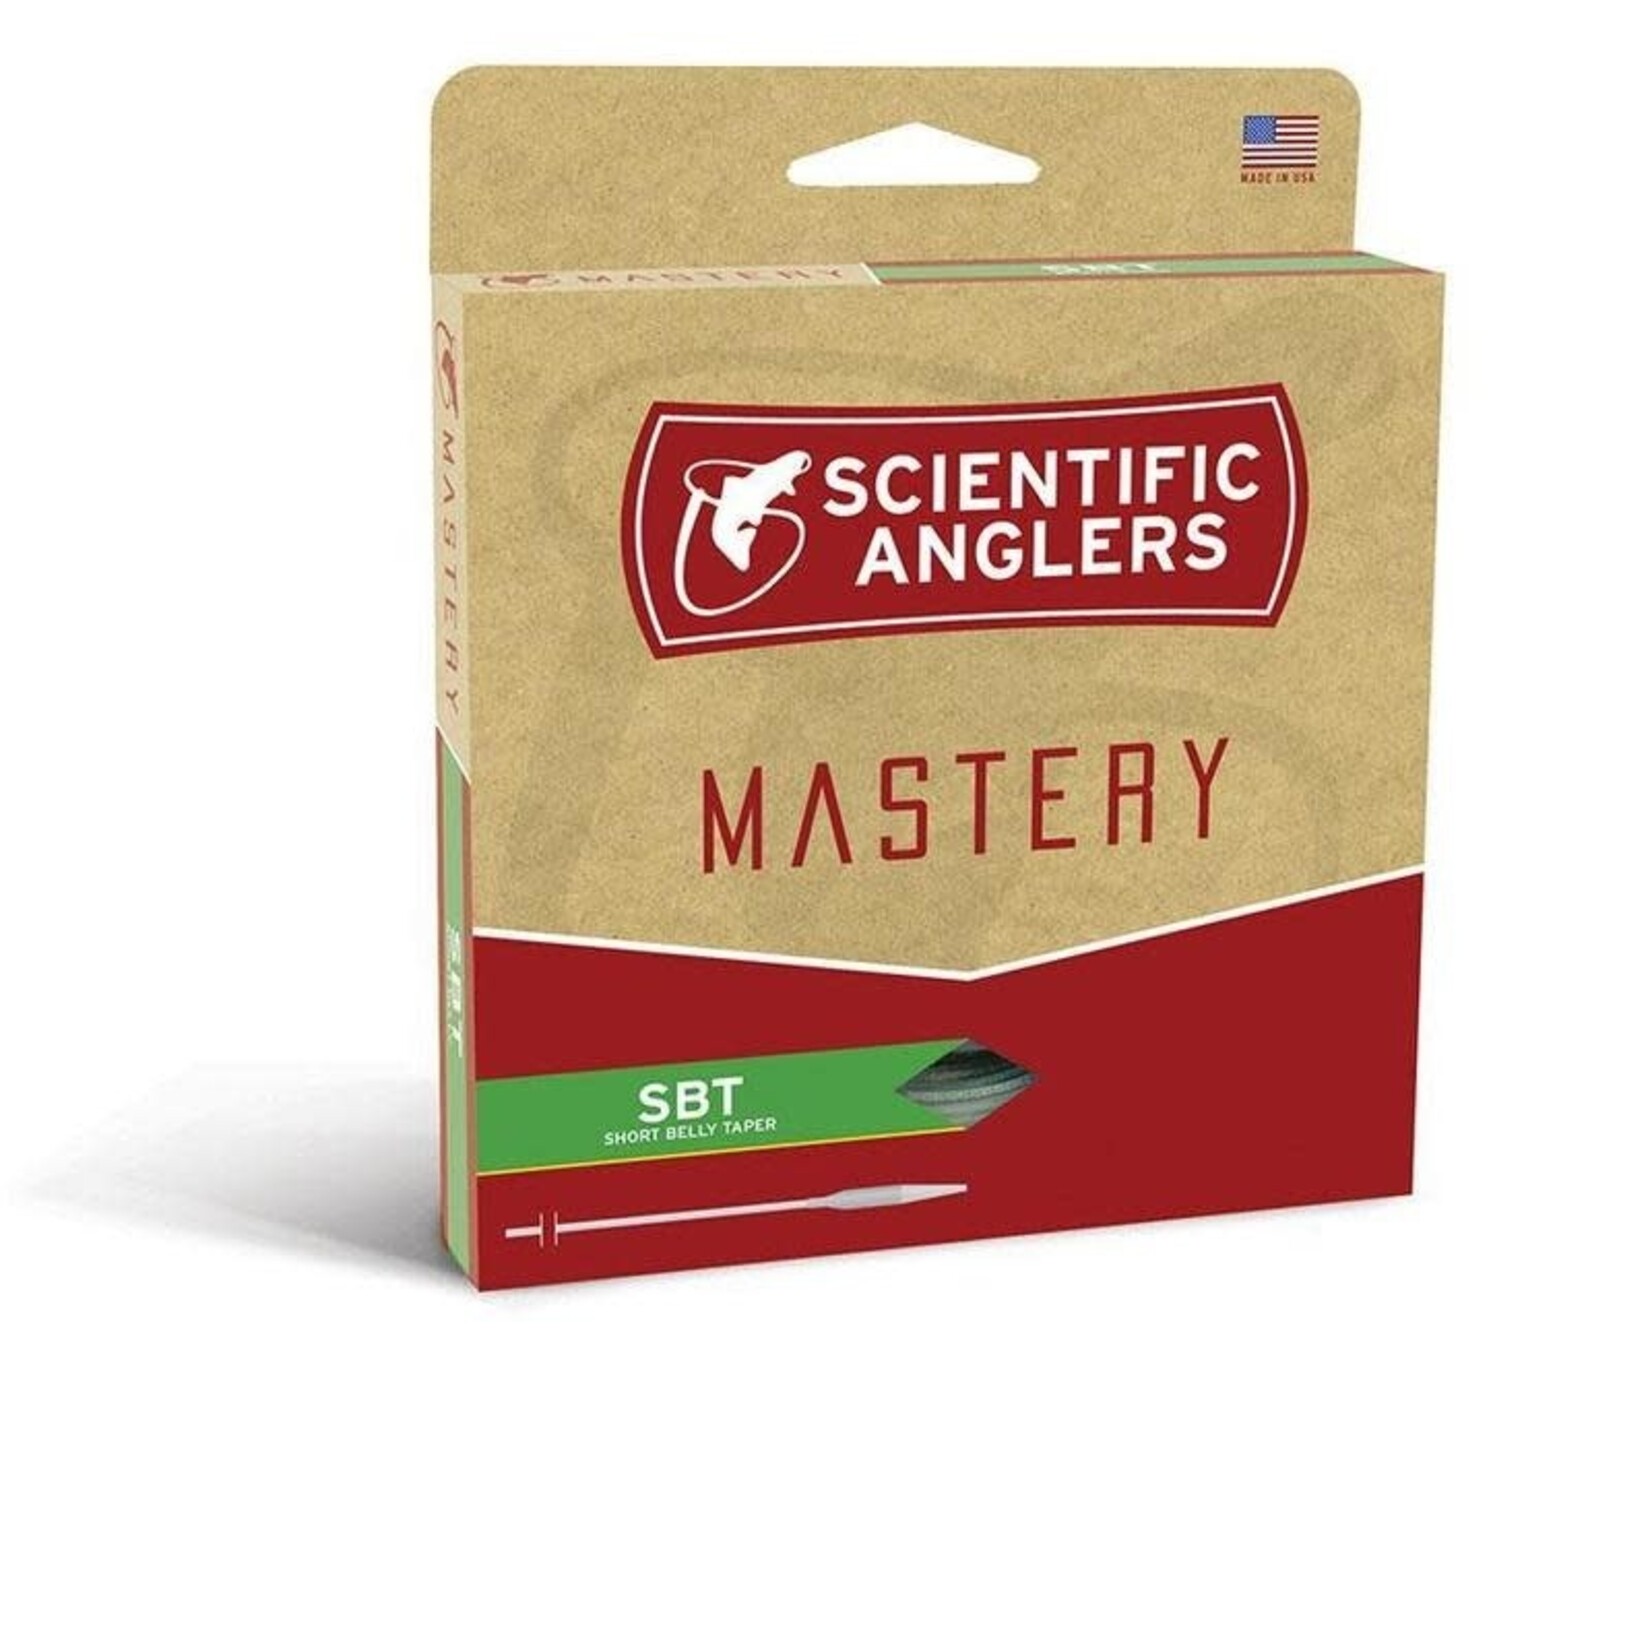 Scientific Anglers Mastery Short Belly Taper -